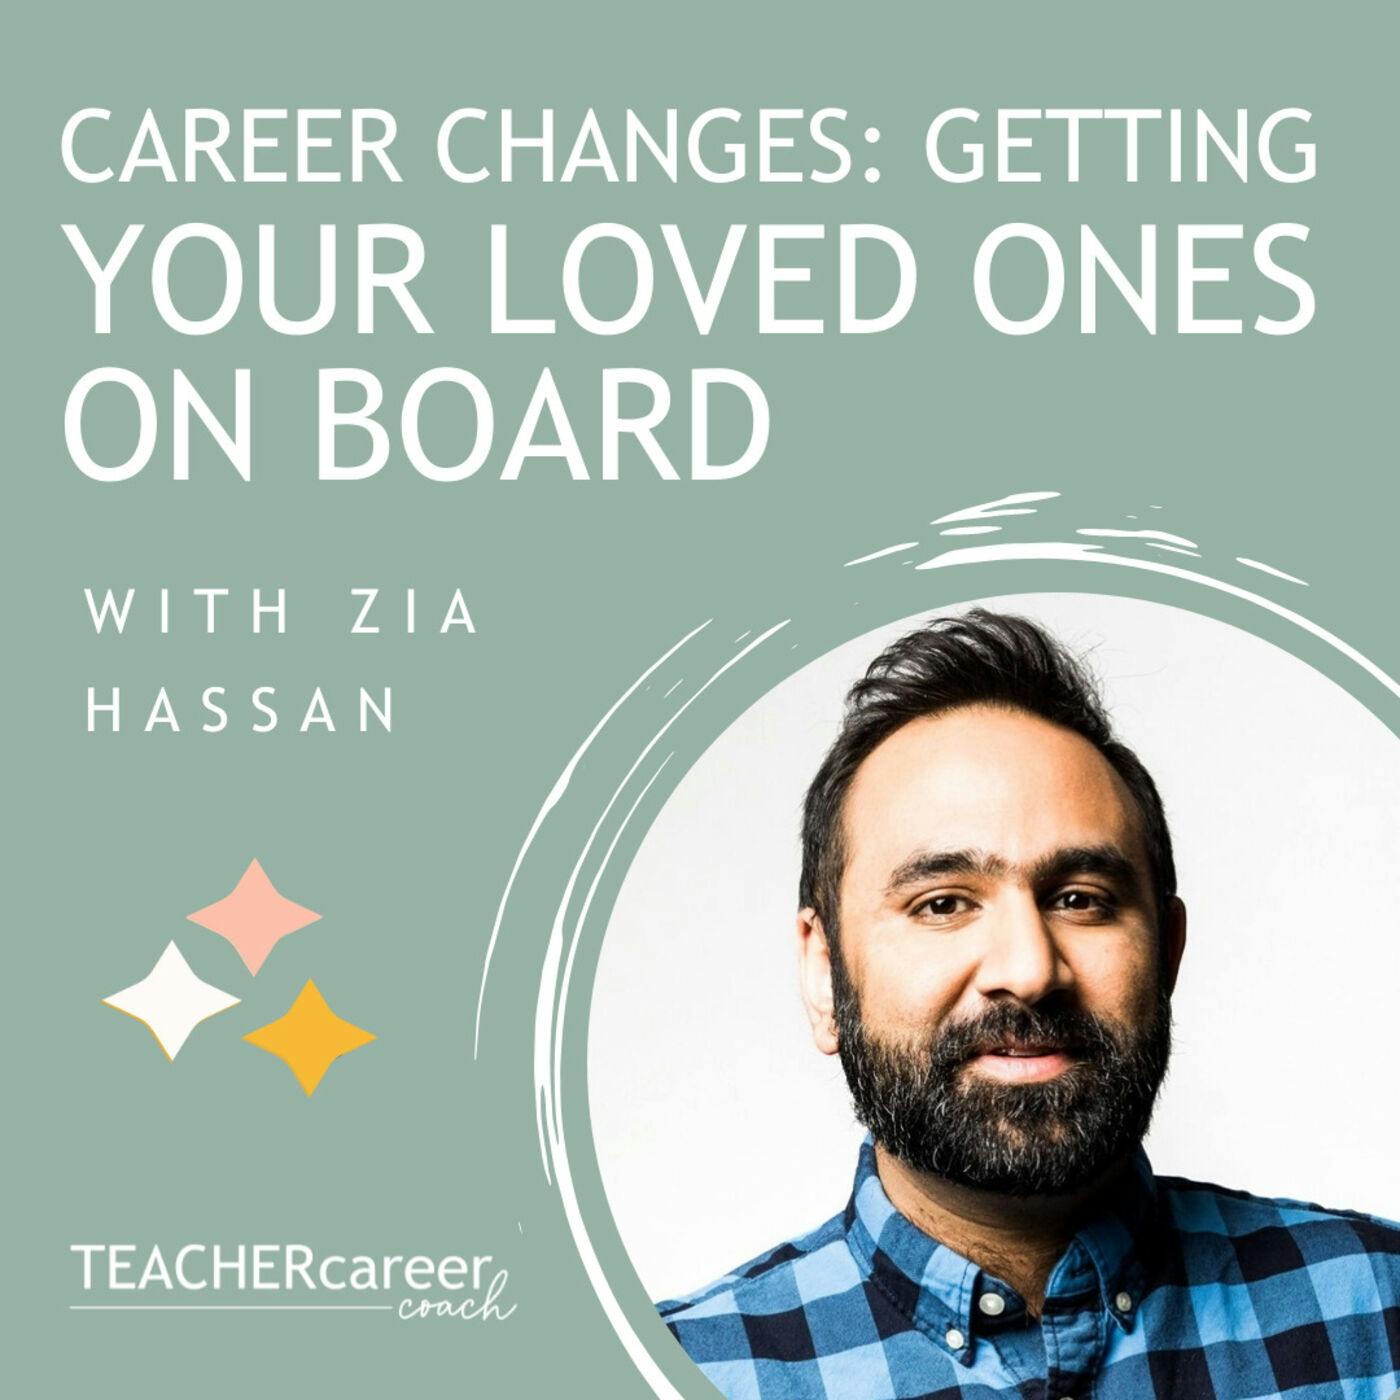 51 - Zia Hassan: Getting Your Loved Ones on Board